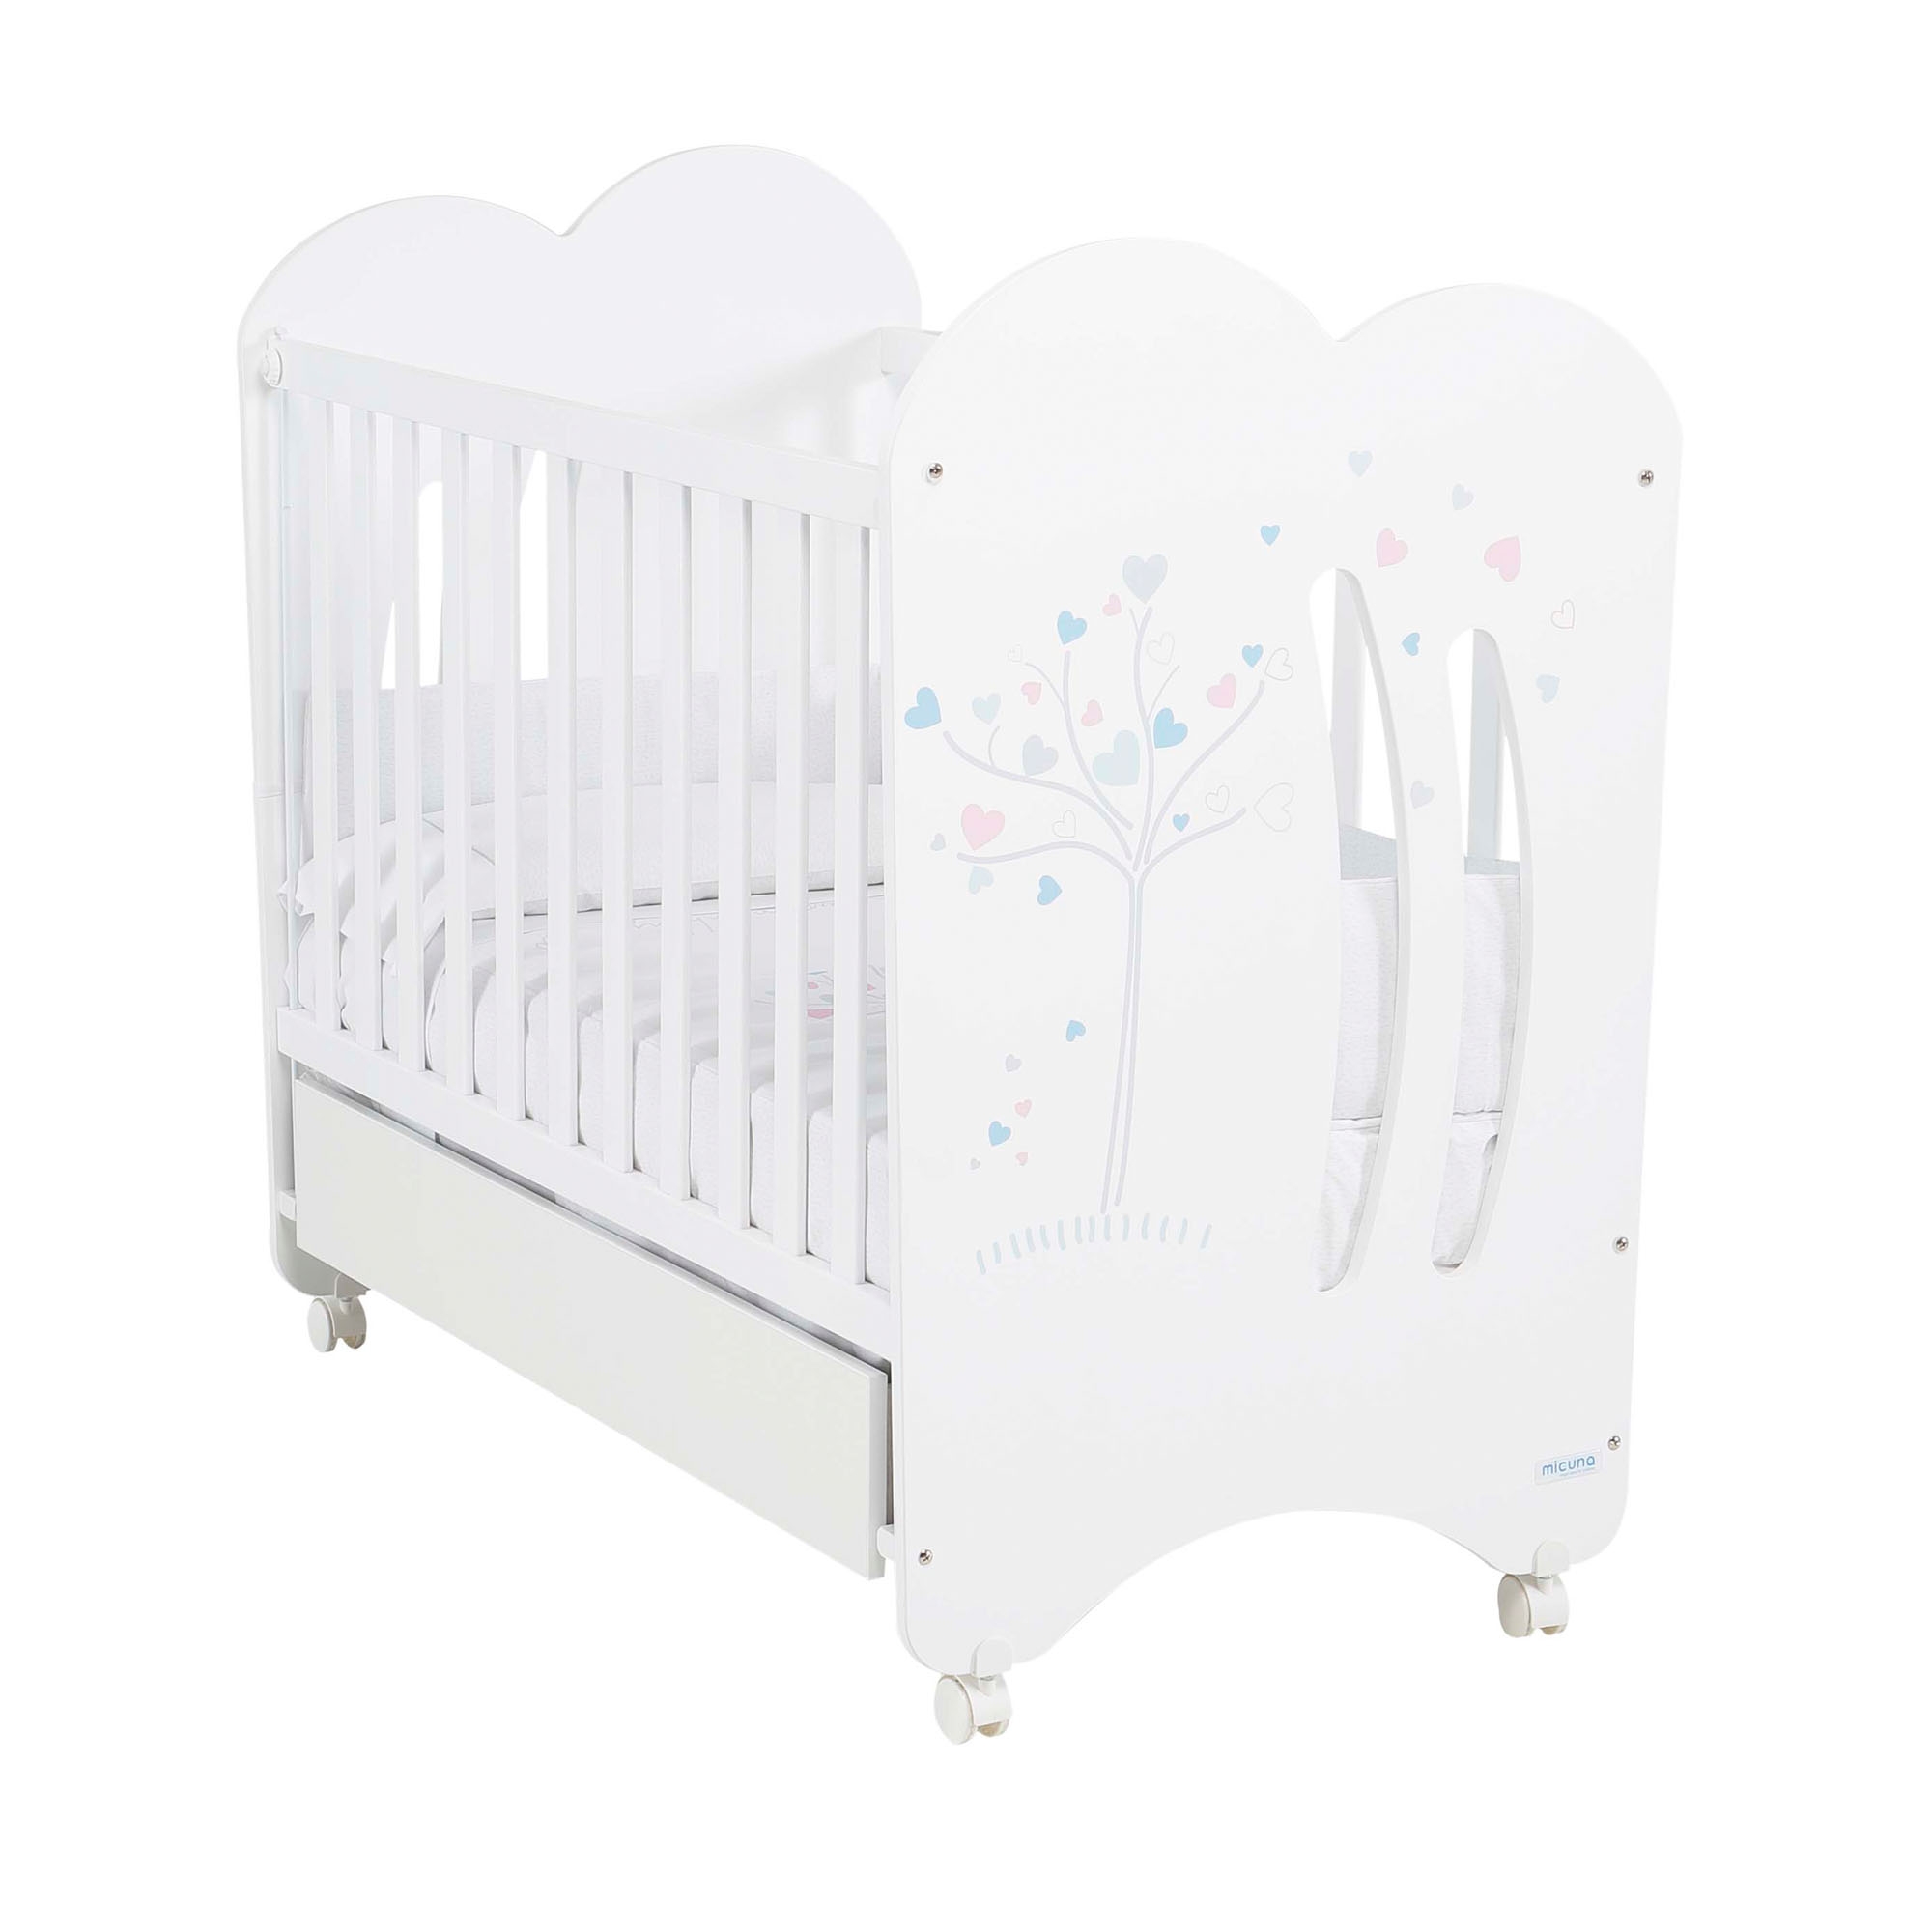 Micuna Aura Baby Cot with Patented Relax System (Made in Spain) + TOP UP for Mattress Available (Unique Double Locking Mechanism for Extra Safety)